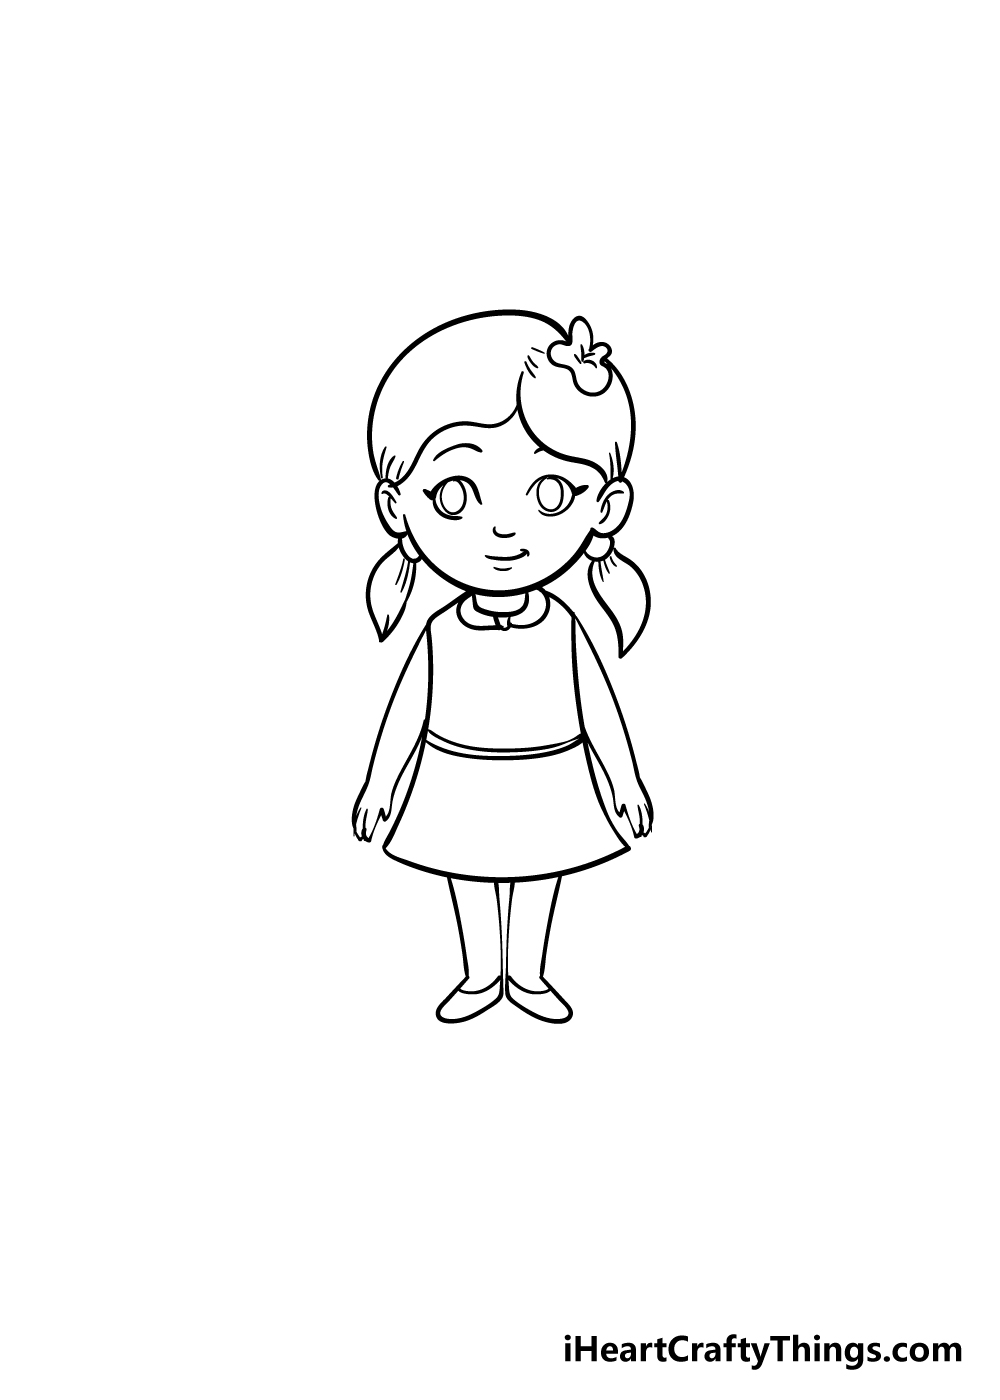 Easy How to Draw a Girl Tutorial Video and Girl Coloring Page-saigonsouth.com.vn